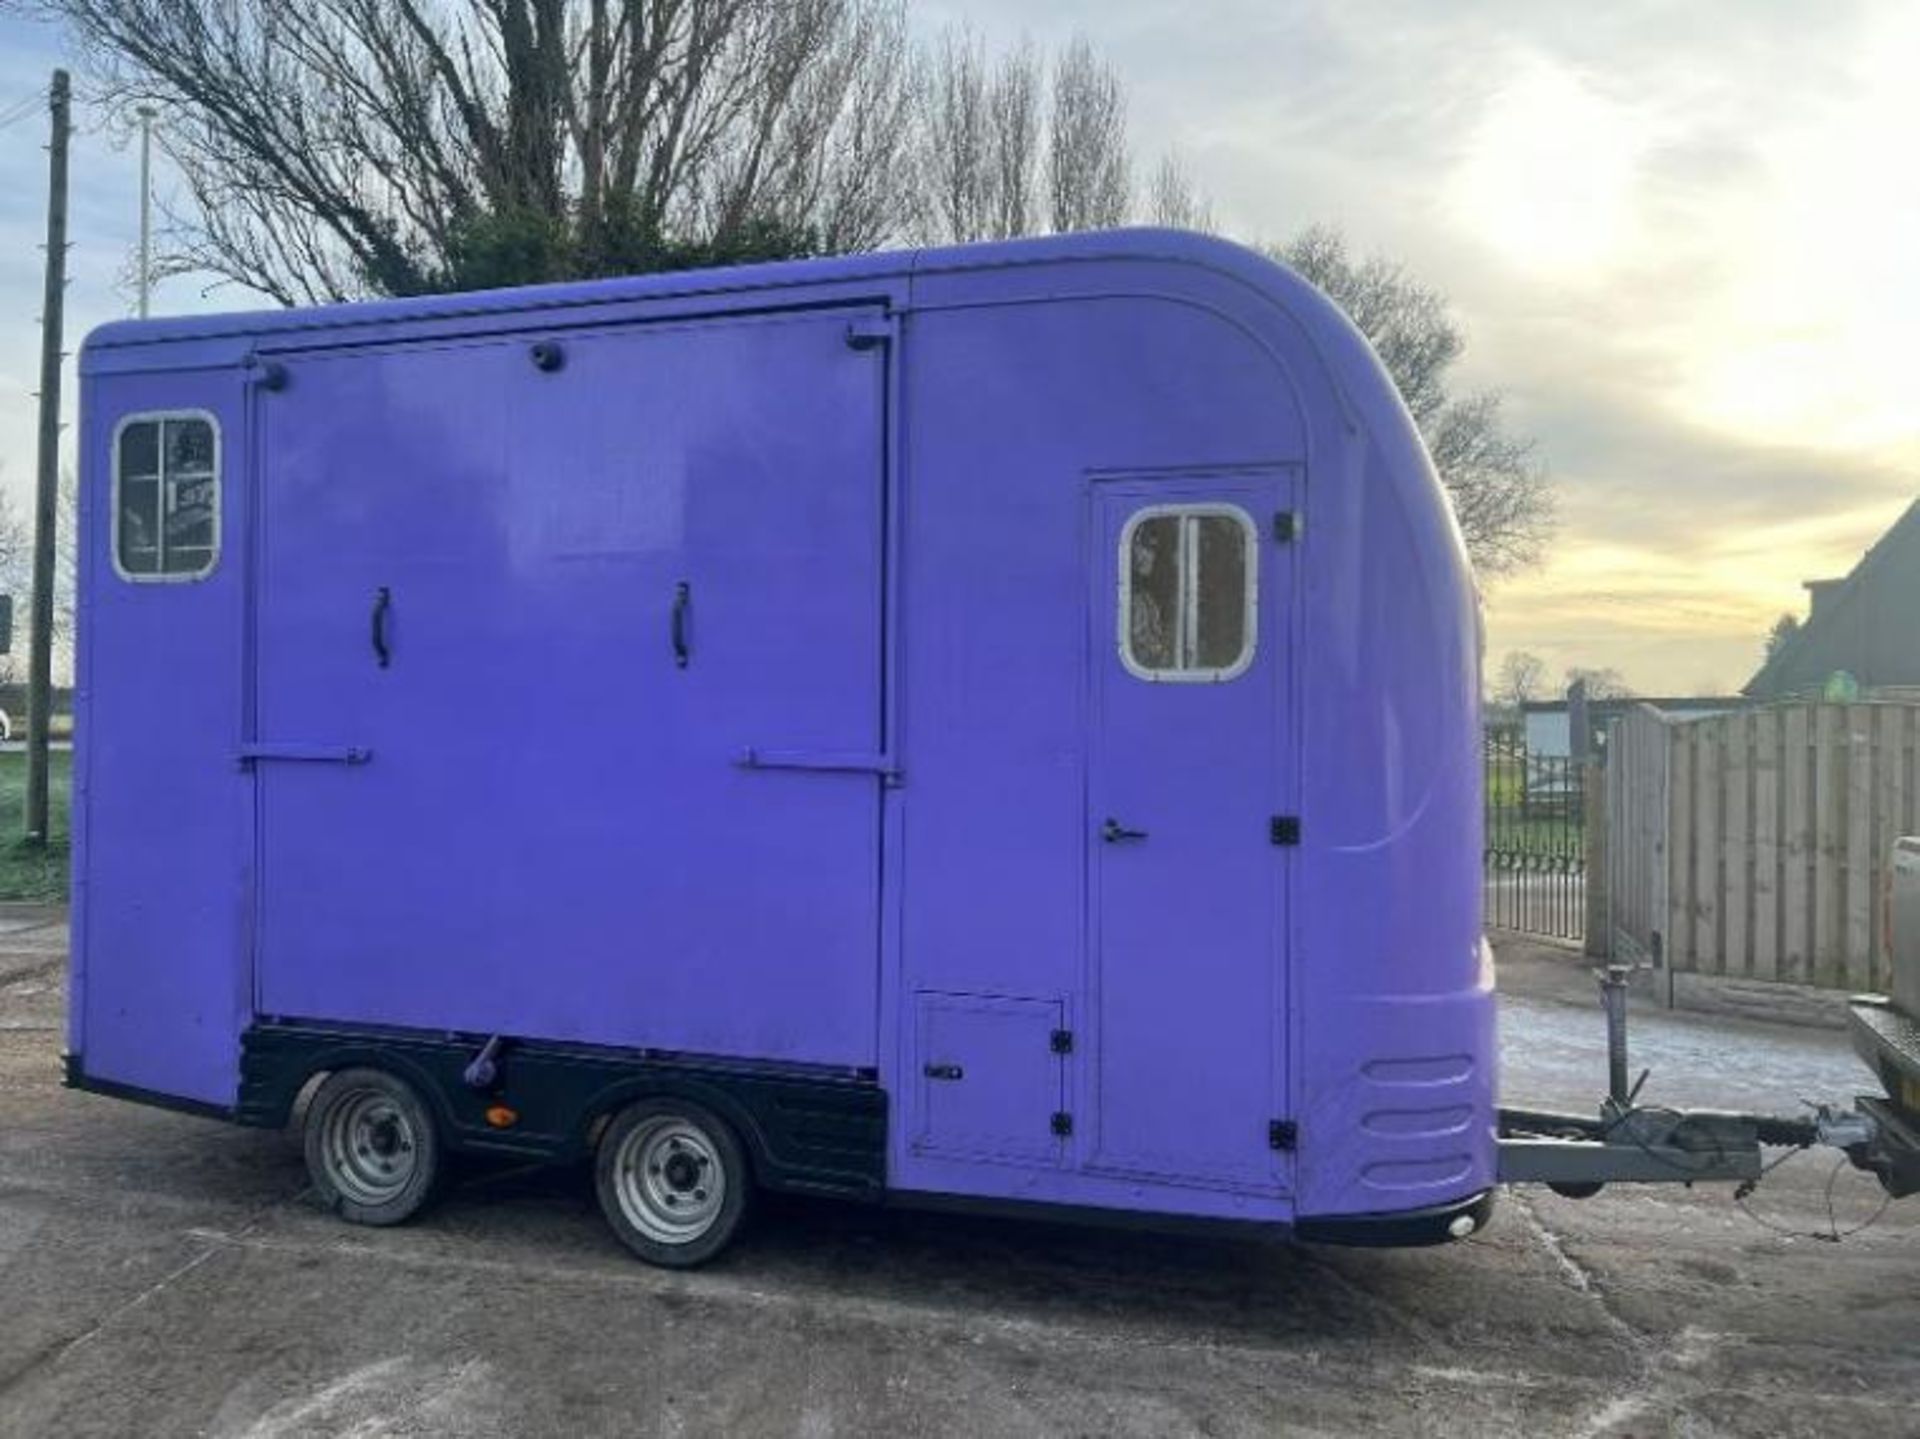 EQUITREK TWIN AXLE HORSE BOX *YEAR 2009* C/W LIVING AREA. - Image 8 of 12